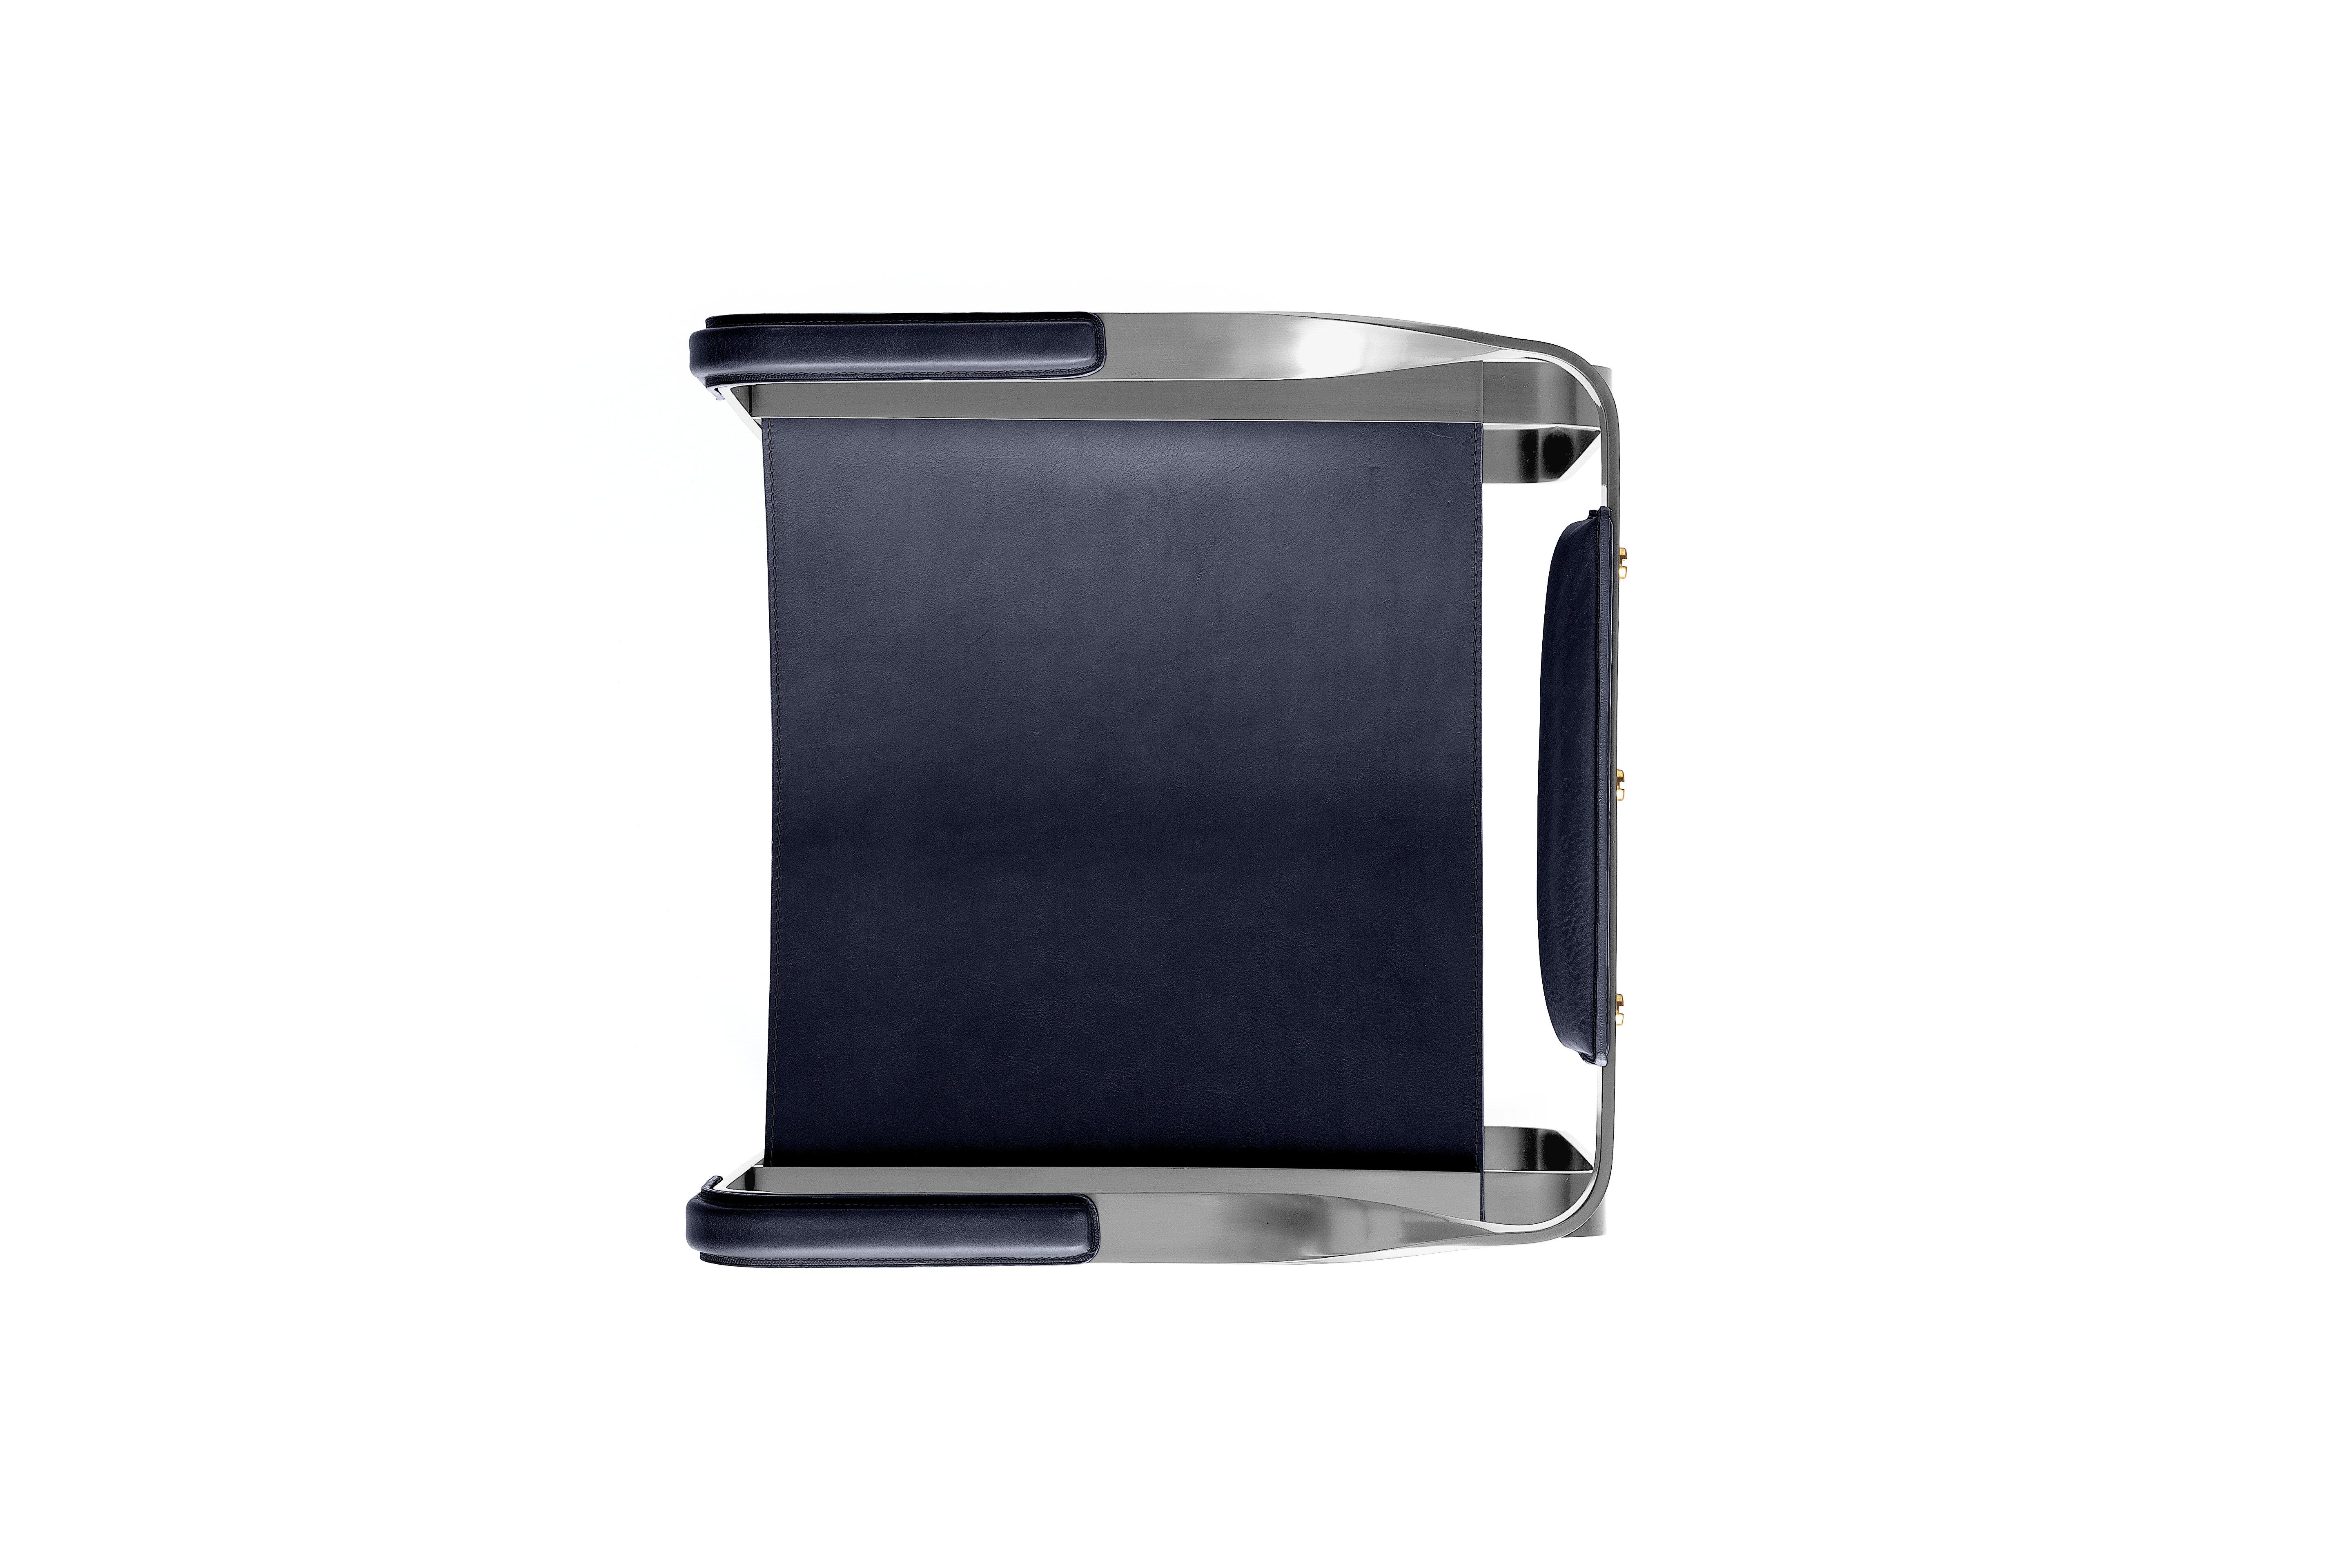 Sessel, Old Silver Steel & Navy Blue Saddle Leather, Contemporary Style (Spanisch) im Angebot